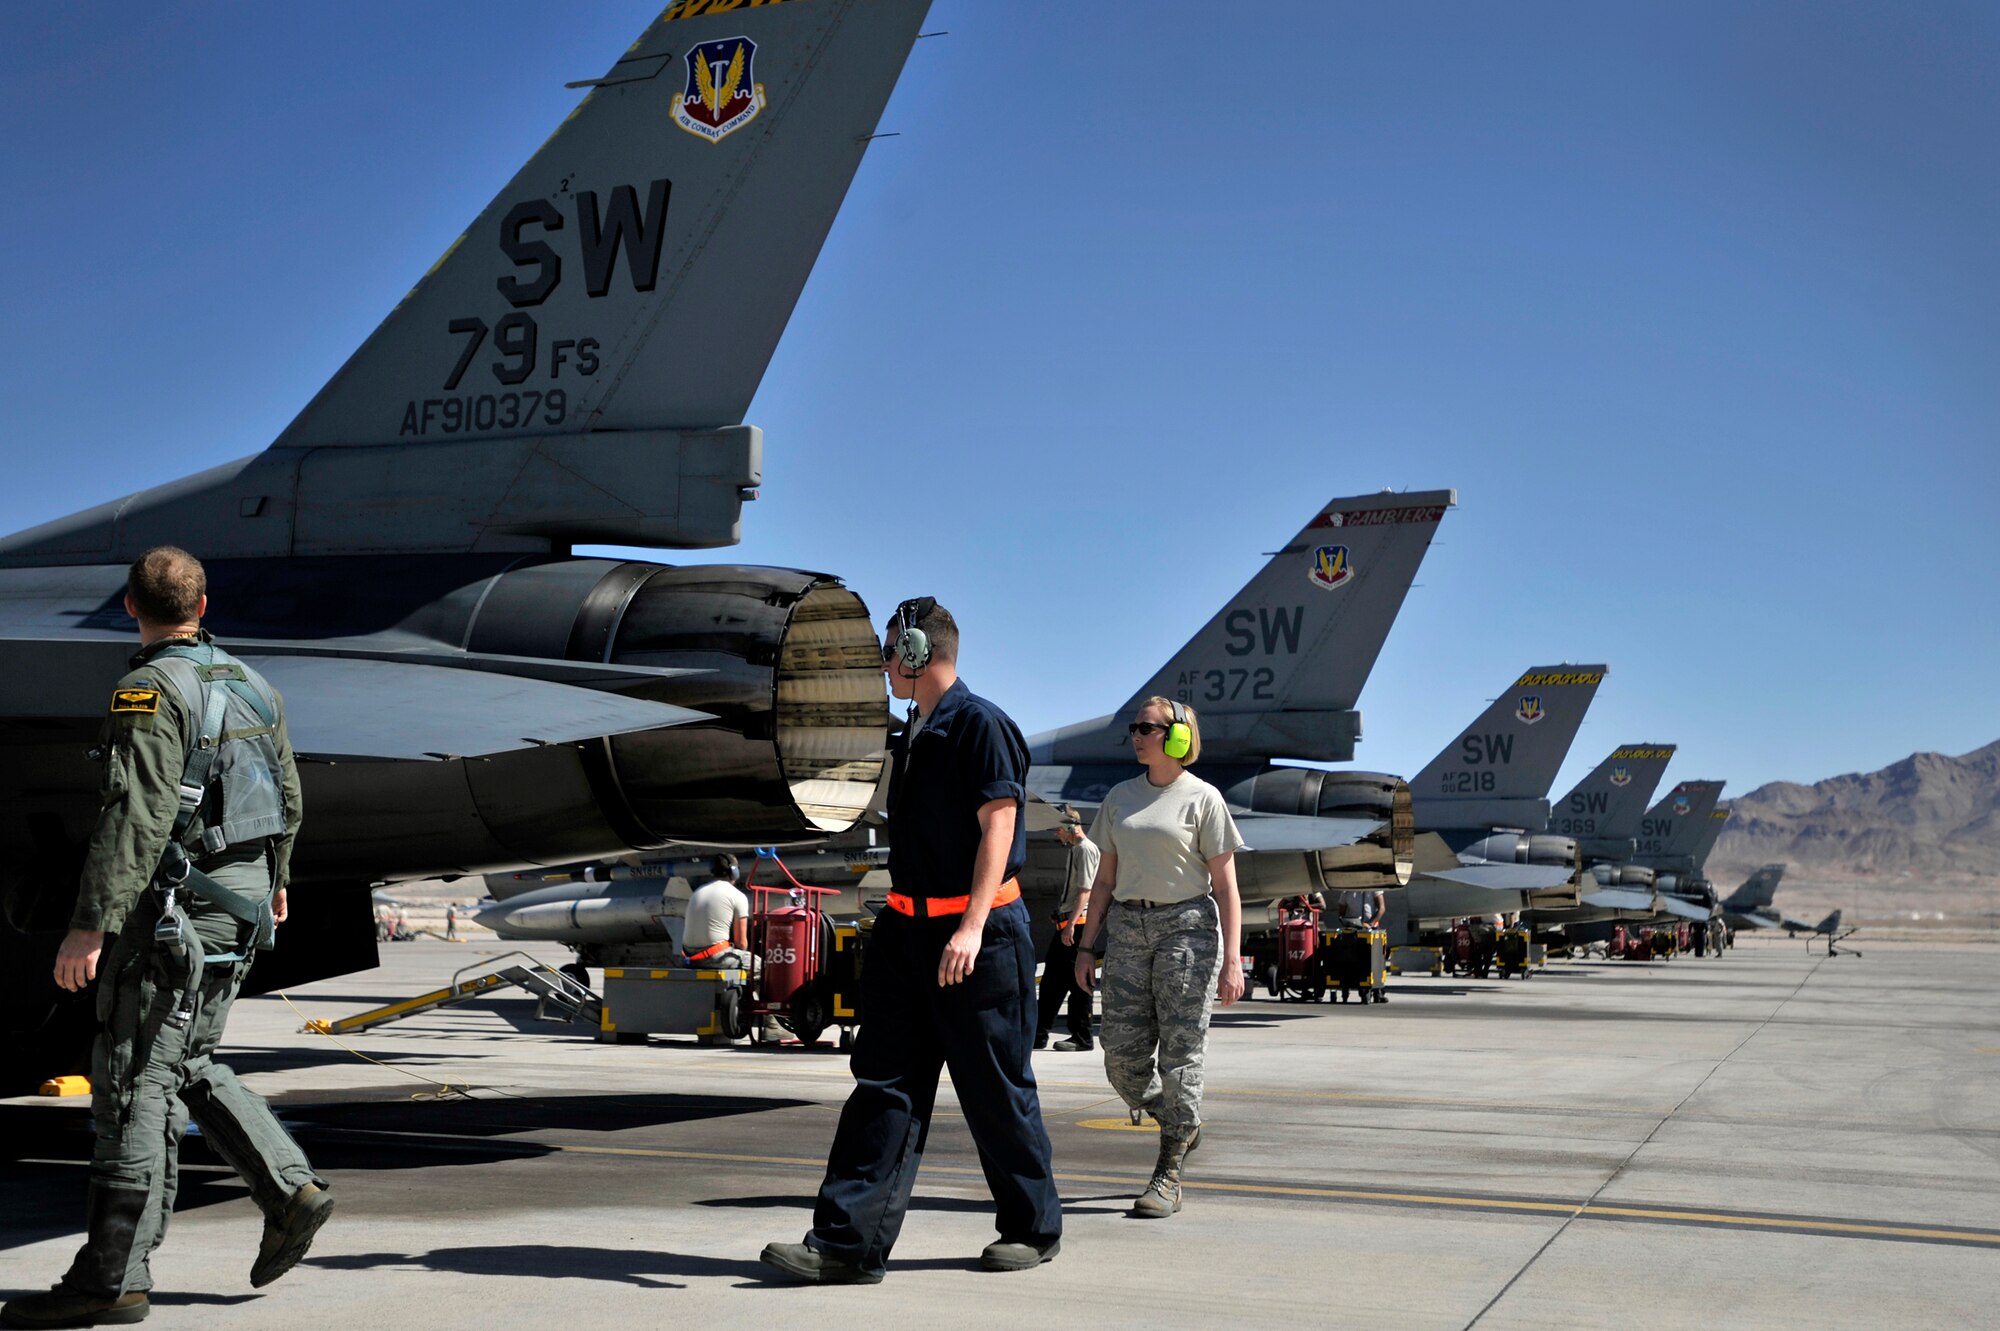 1st Lt. Phill Wilson, 79th Fighter Squadron pilot, (left), Staff Sgt. Dominic Perrone, 20th Aircraft Maintenance Squadron crew chief, (center) and Staff Sgt. Elizabeth Tyburski, 20th Communications Squadron client service technician, inspect a 79th Fighter Squadron ‘Tigers’ F-16 Fighting Falcon during Red Flag 13-3, March 12, 2013, Nellis Air Force Base, Nev. Tyburski received the rare opportunity to launch an F-16 and experienced what it’s like to be a crew chief. (U.S. Air Force photo by Staff Sgt. Kenny Holston/Released)